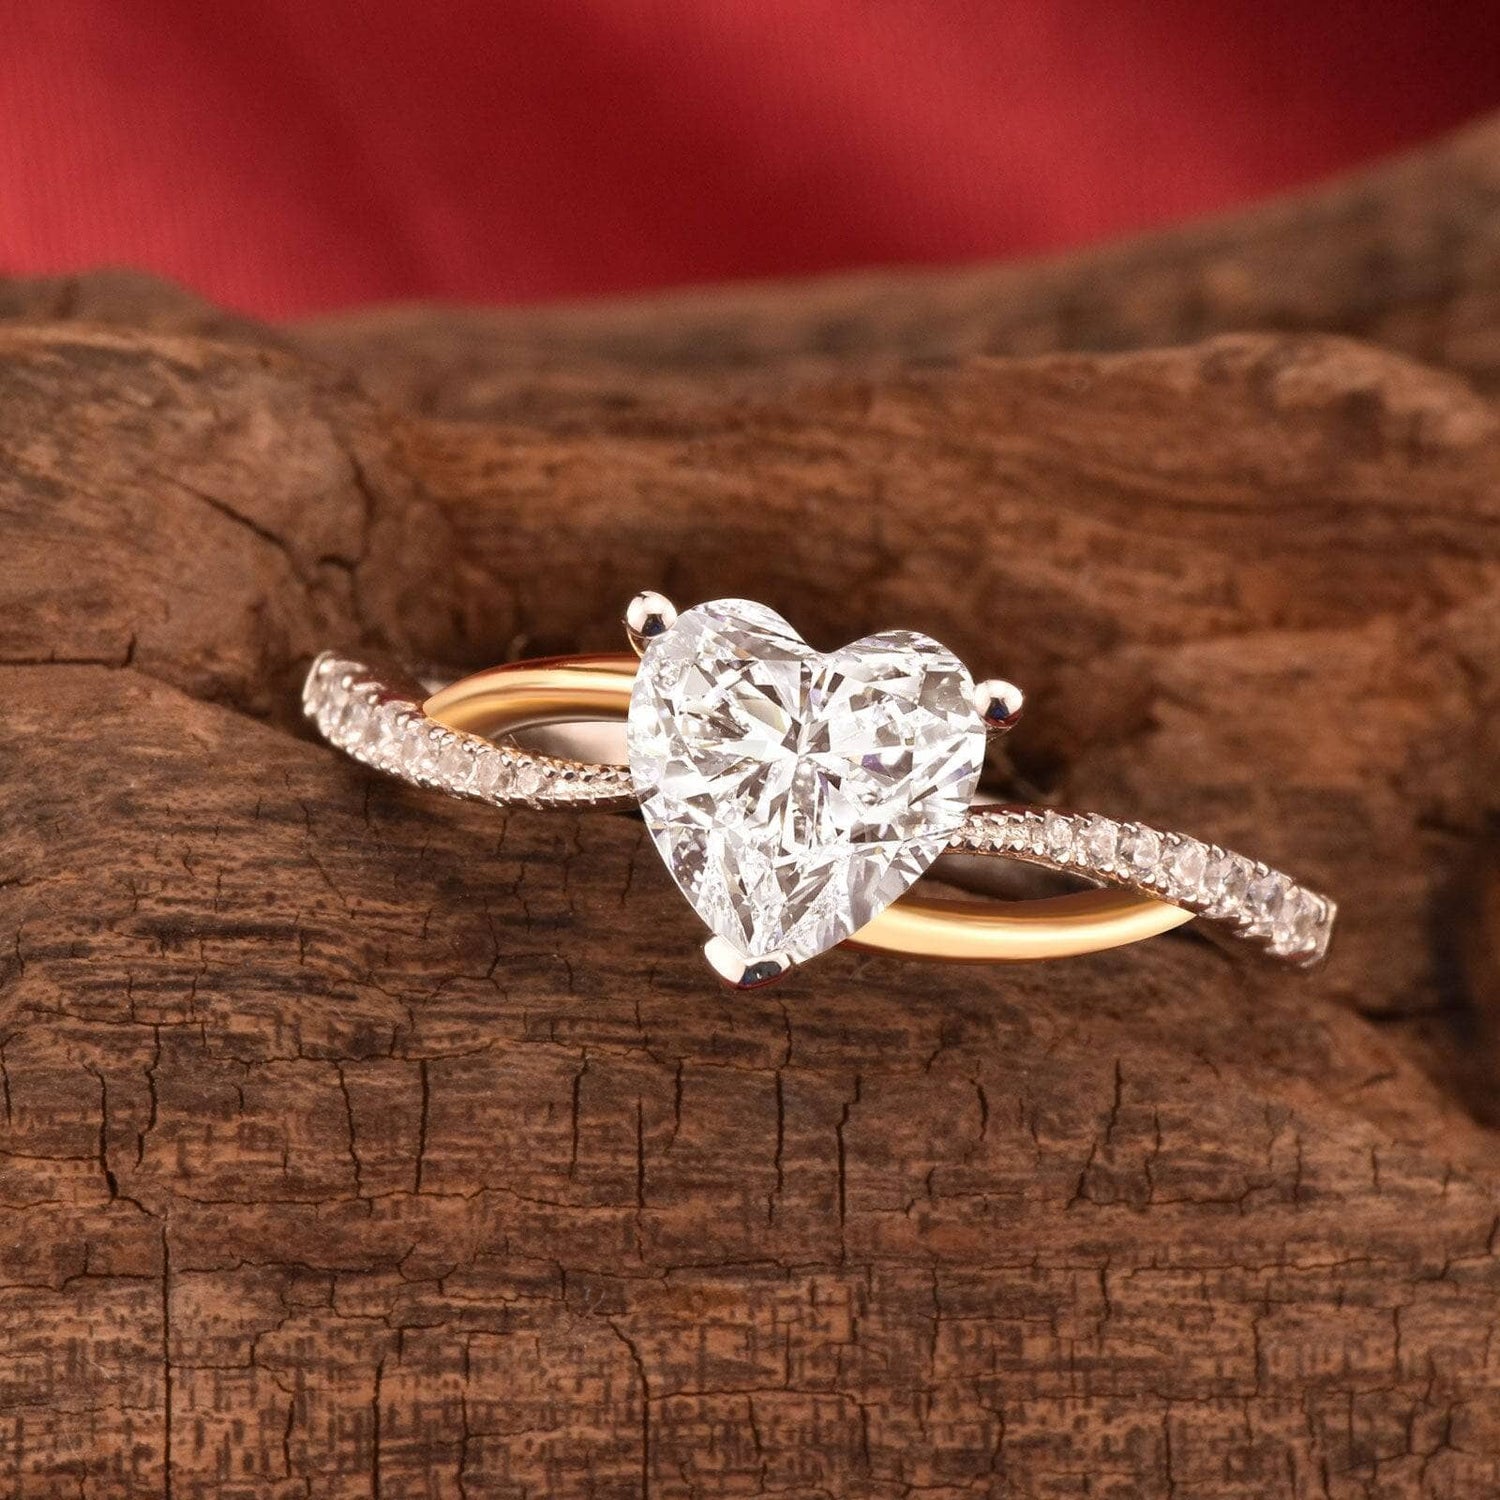 Heart Shaped Adjustable CZ Stone Ring: Gift/Send Mother's Day Gifts Online  JVS1206308 |IGP.com